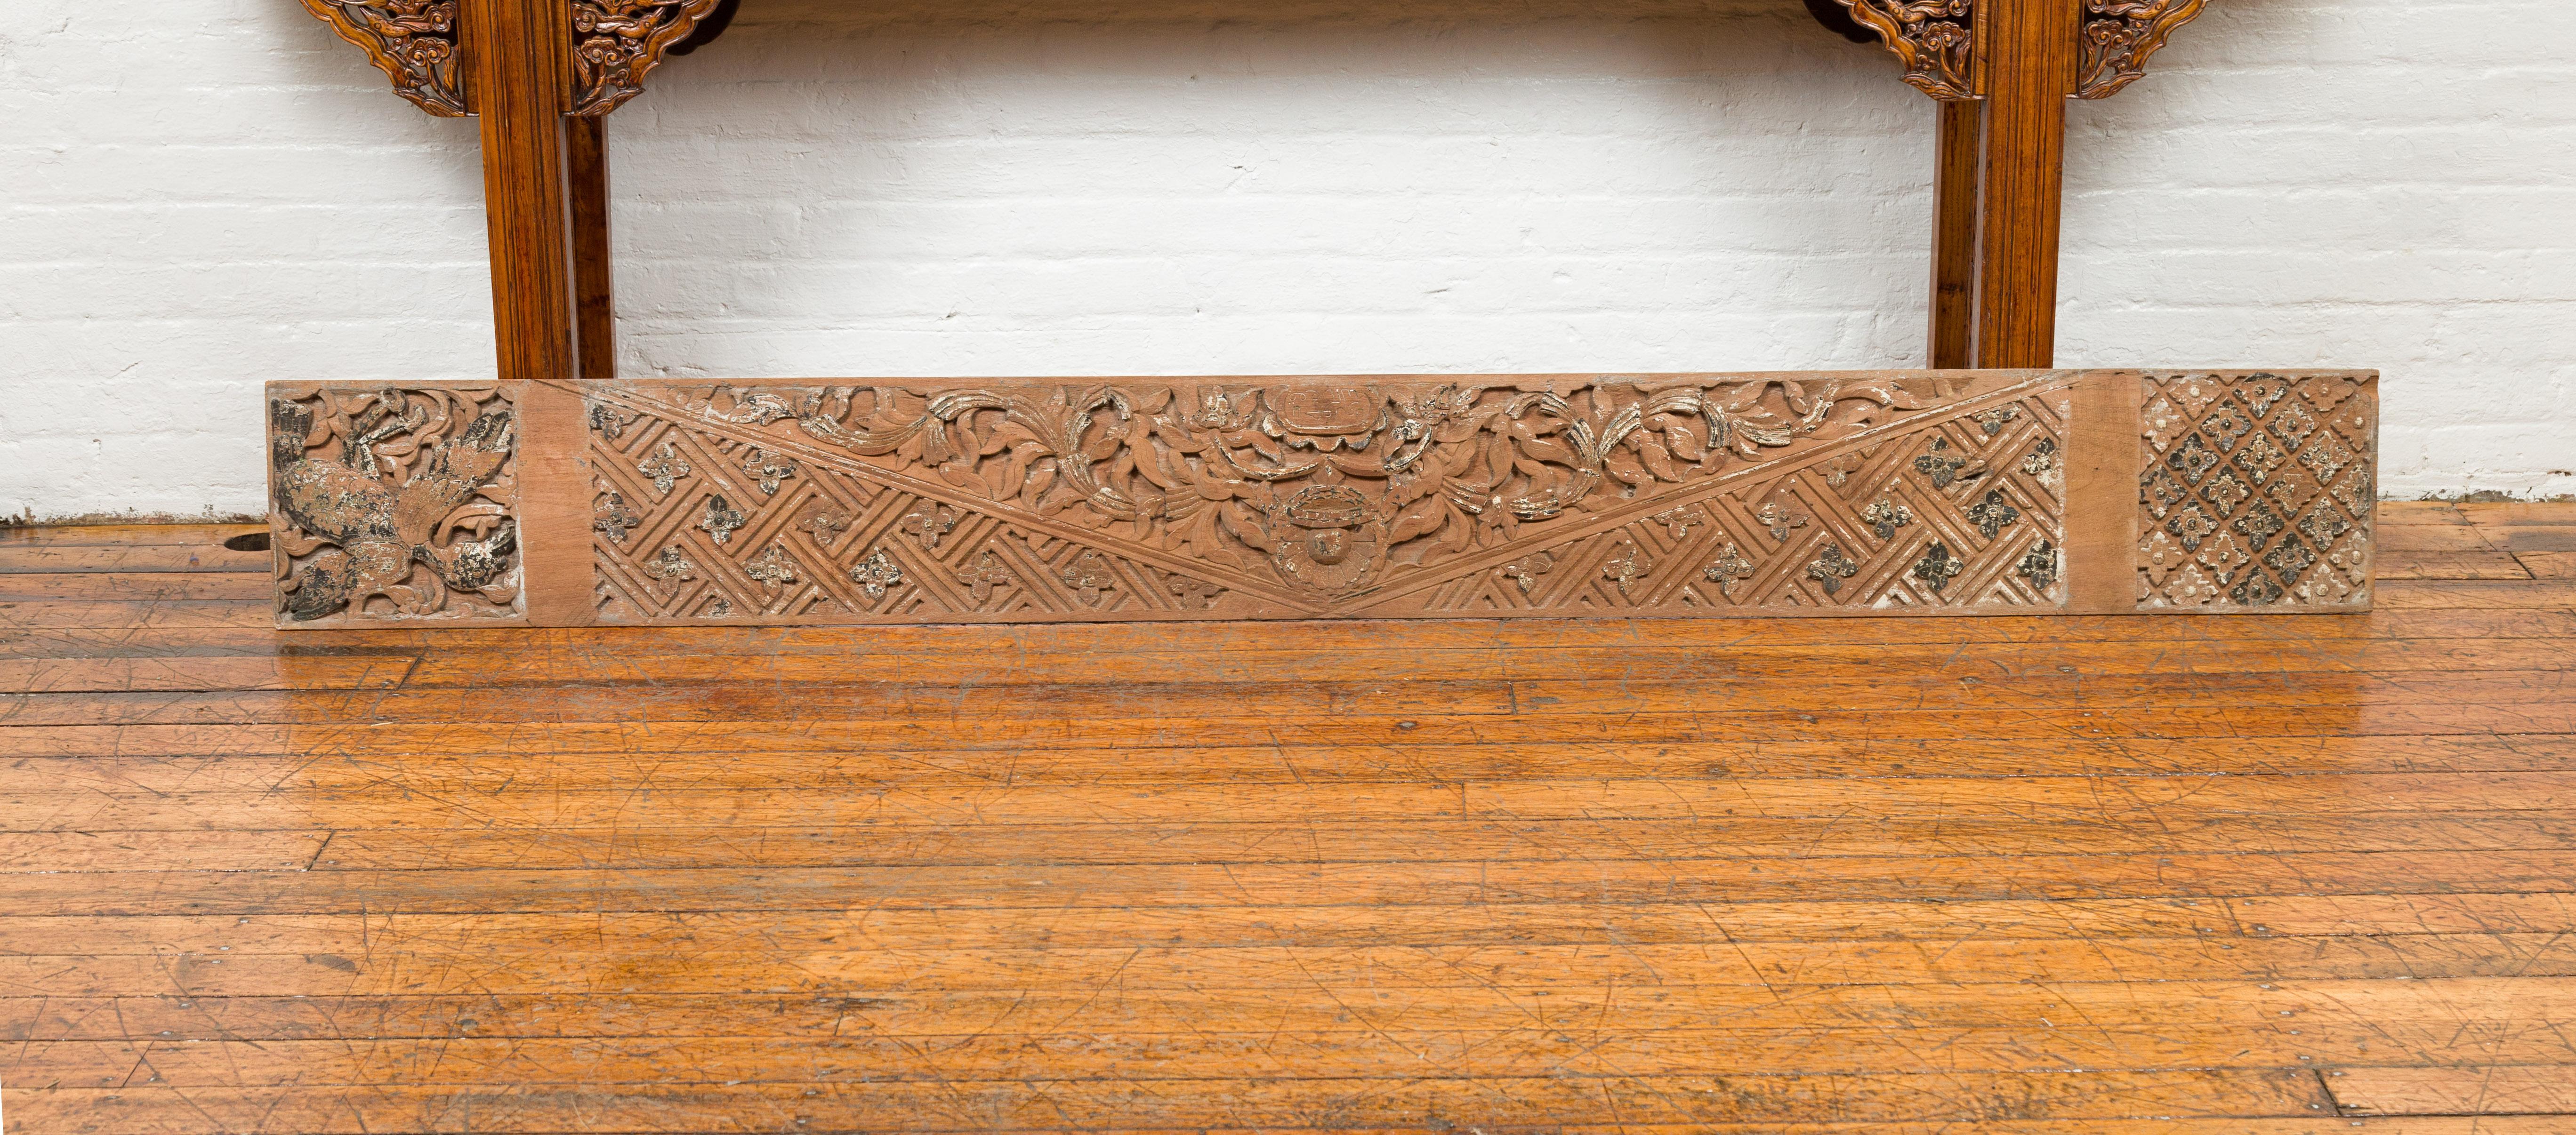 Pair of Antique Indonesian Carved Wooden Panels with Traces of Polychromy In Good Condition For Sale In Yonkers, NY